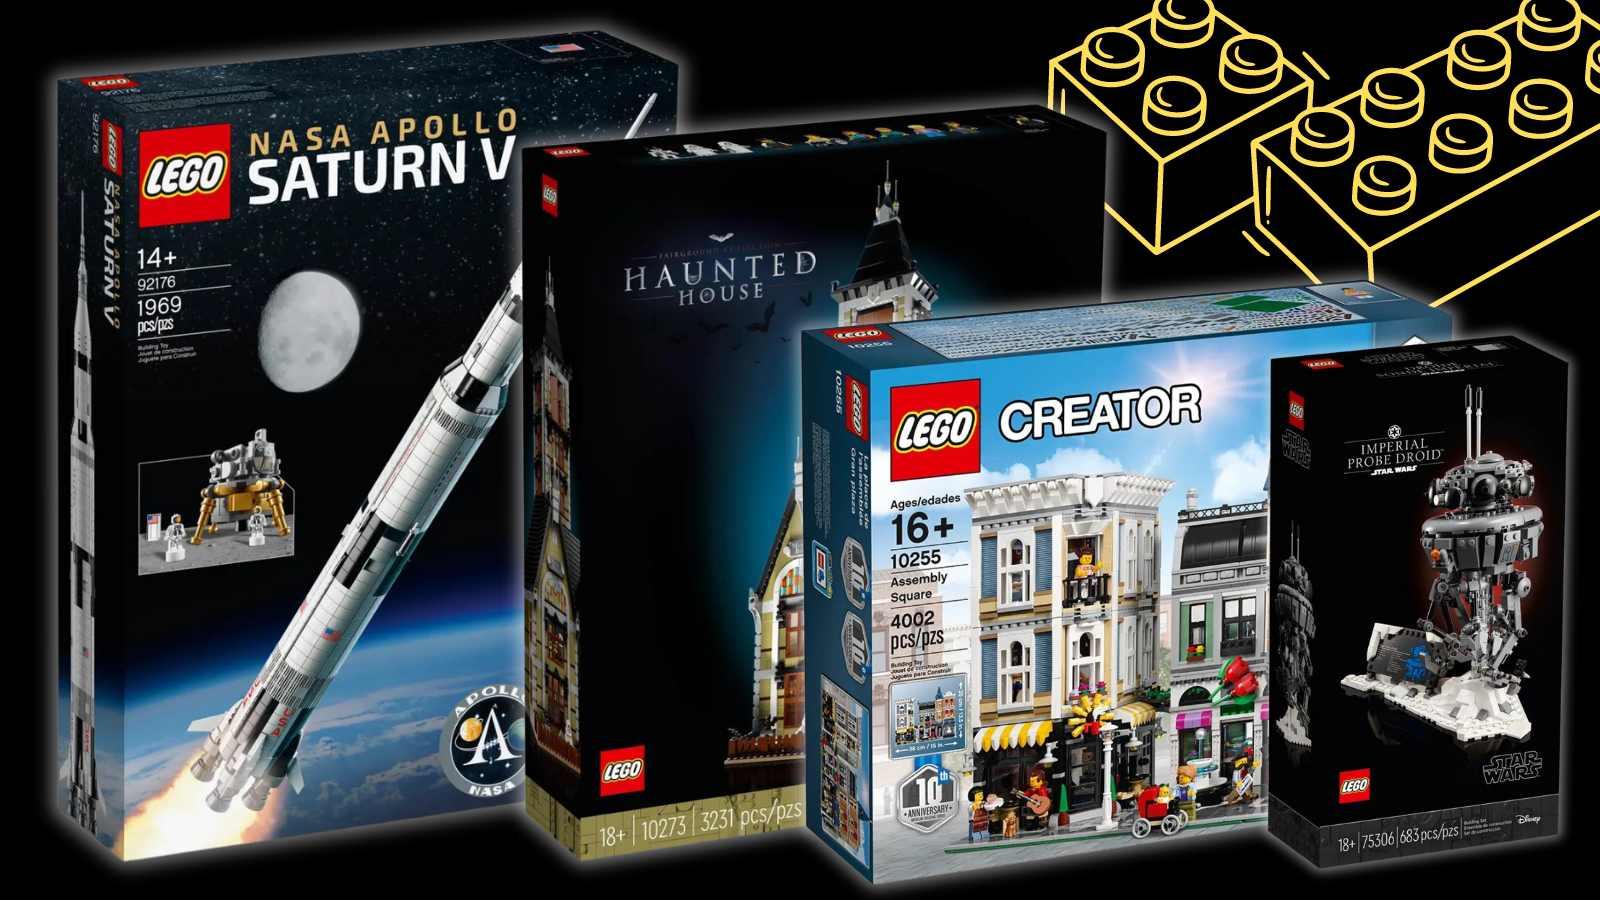 Four of the retired LEGO sets that are still available at Amazon